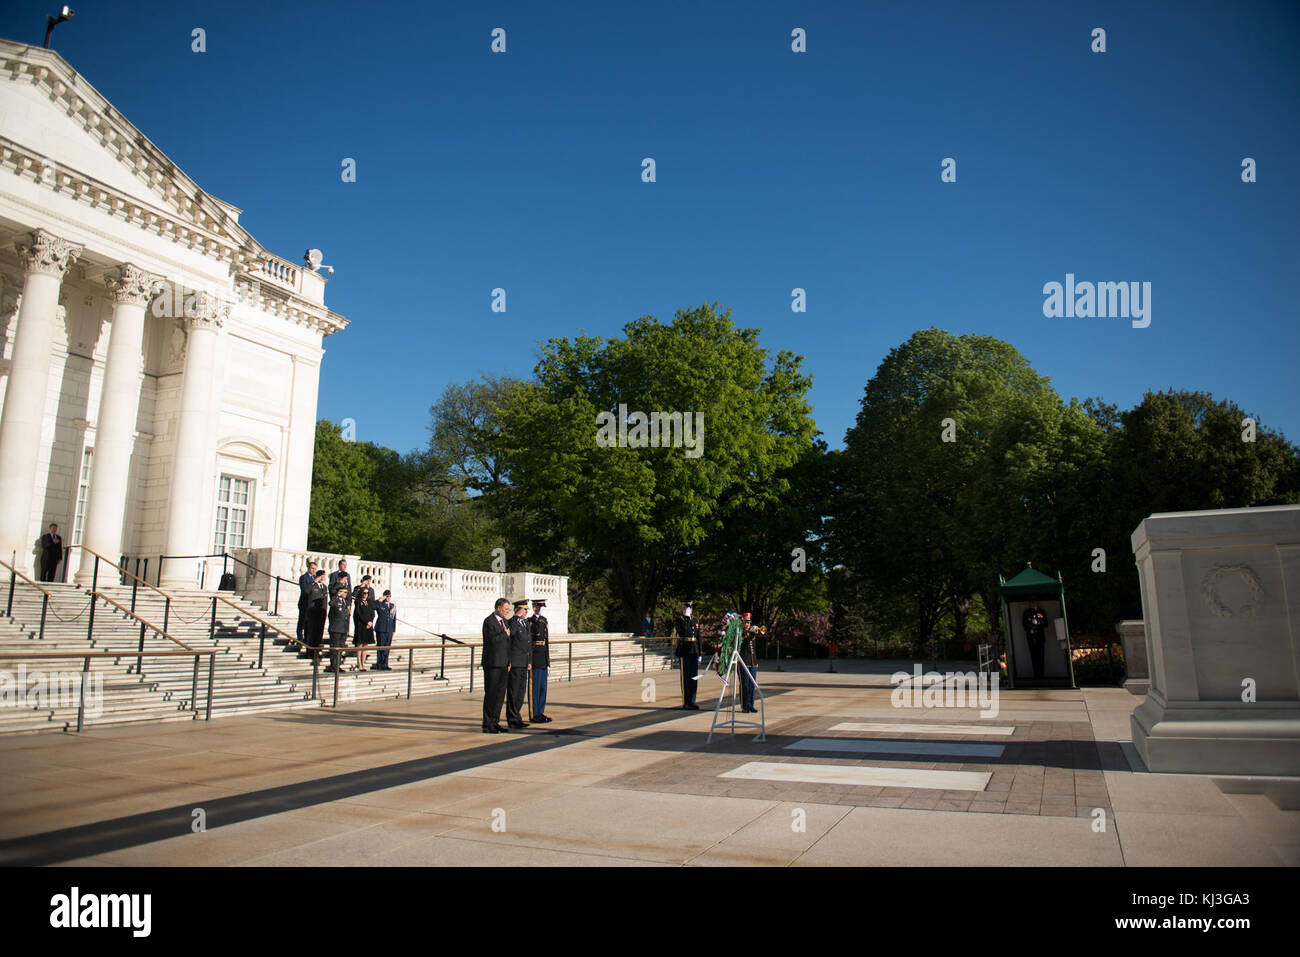 Minister of the Kosovo Security Force and Commander of the KSF lay a wreath at the Tomb of the Unknown Soldier in Arlington National Cemetery (25937056834) Stock Photo